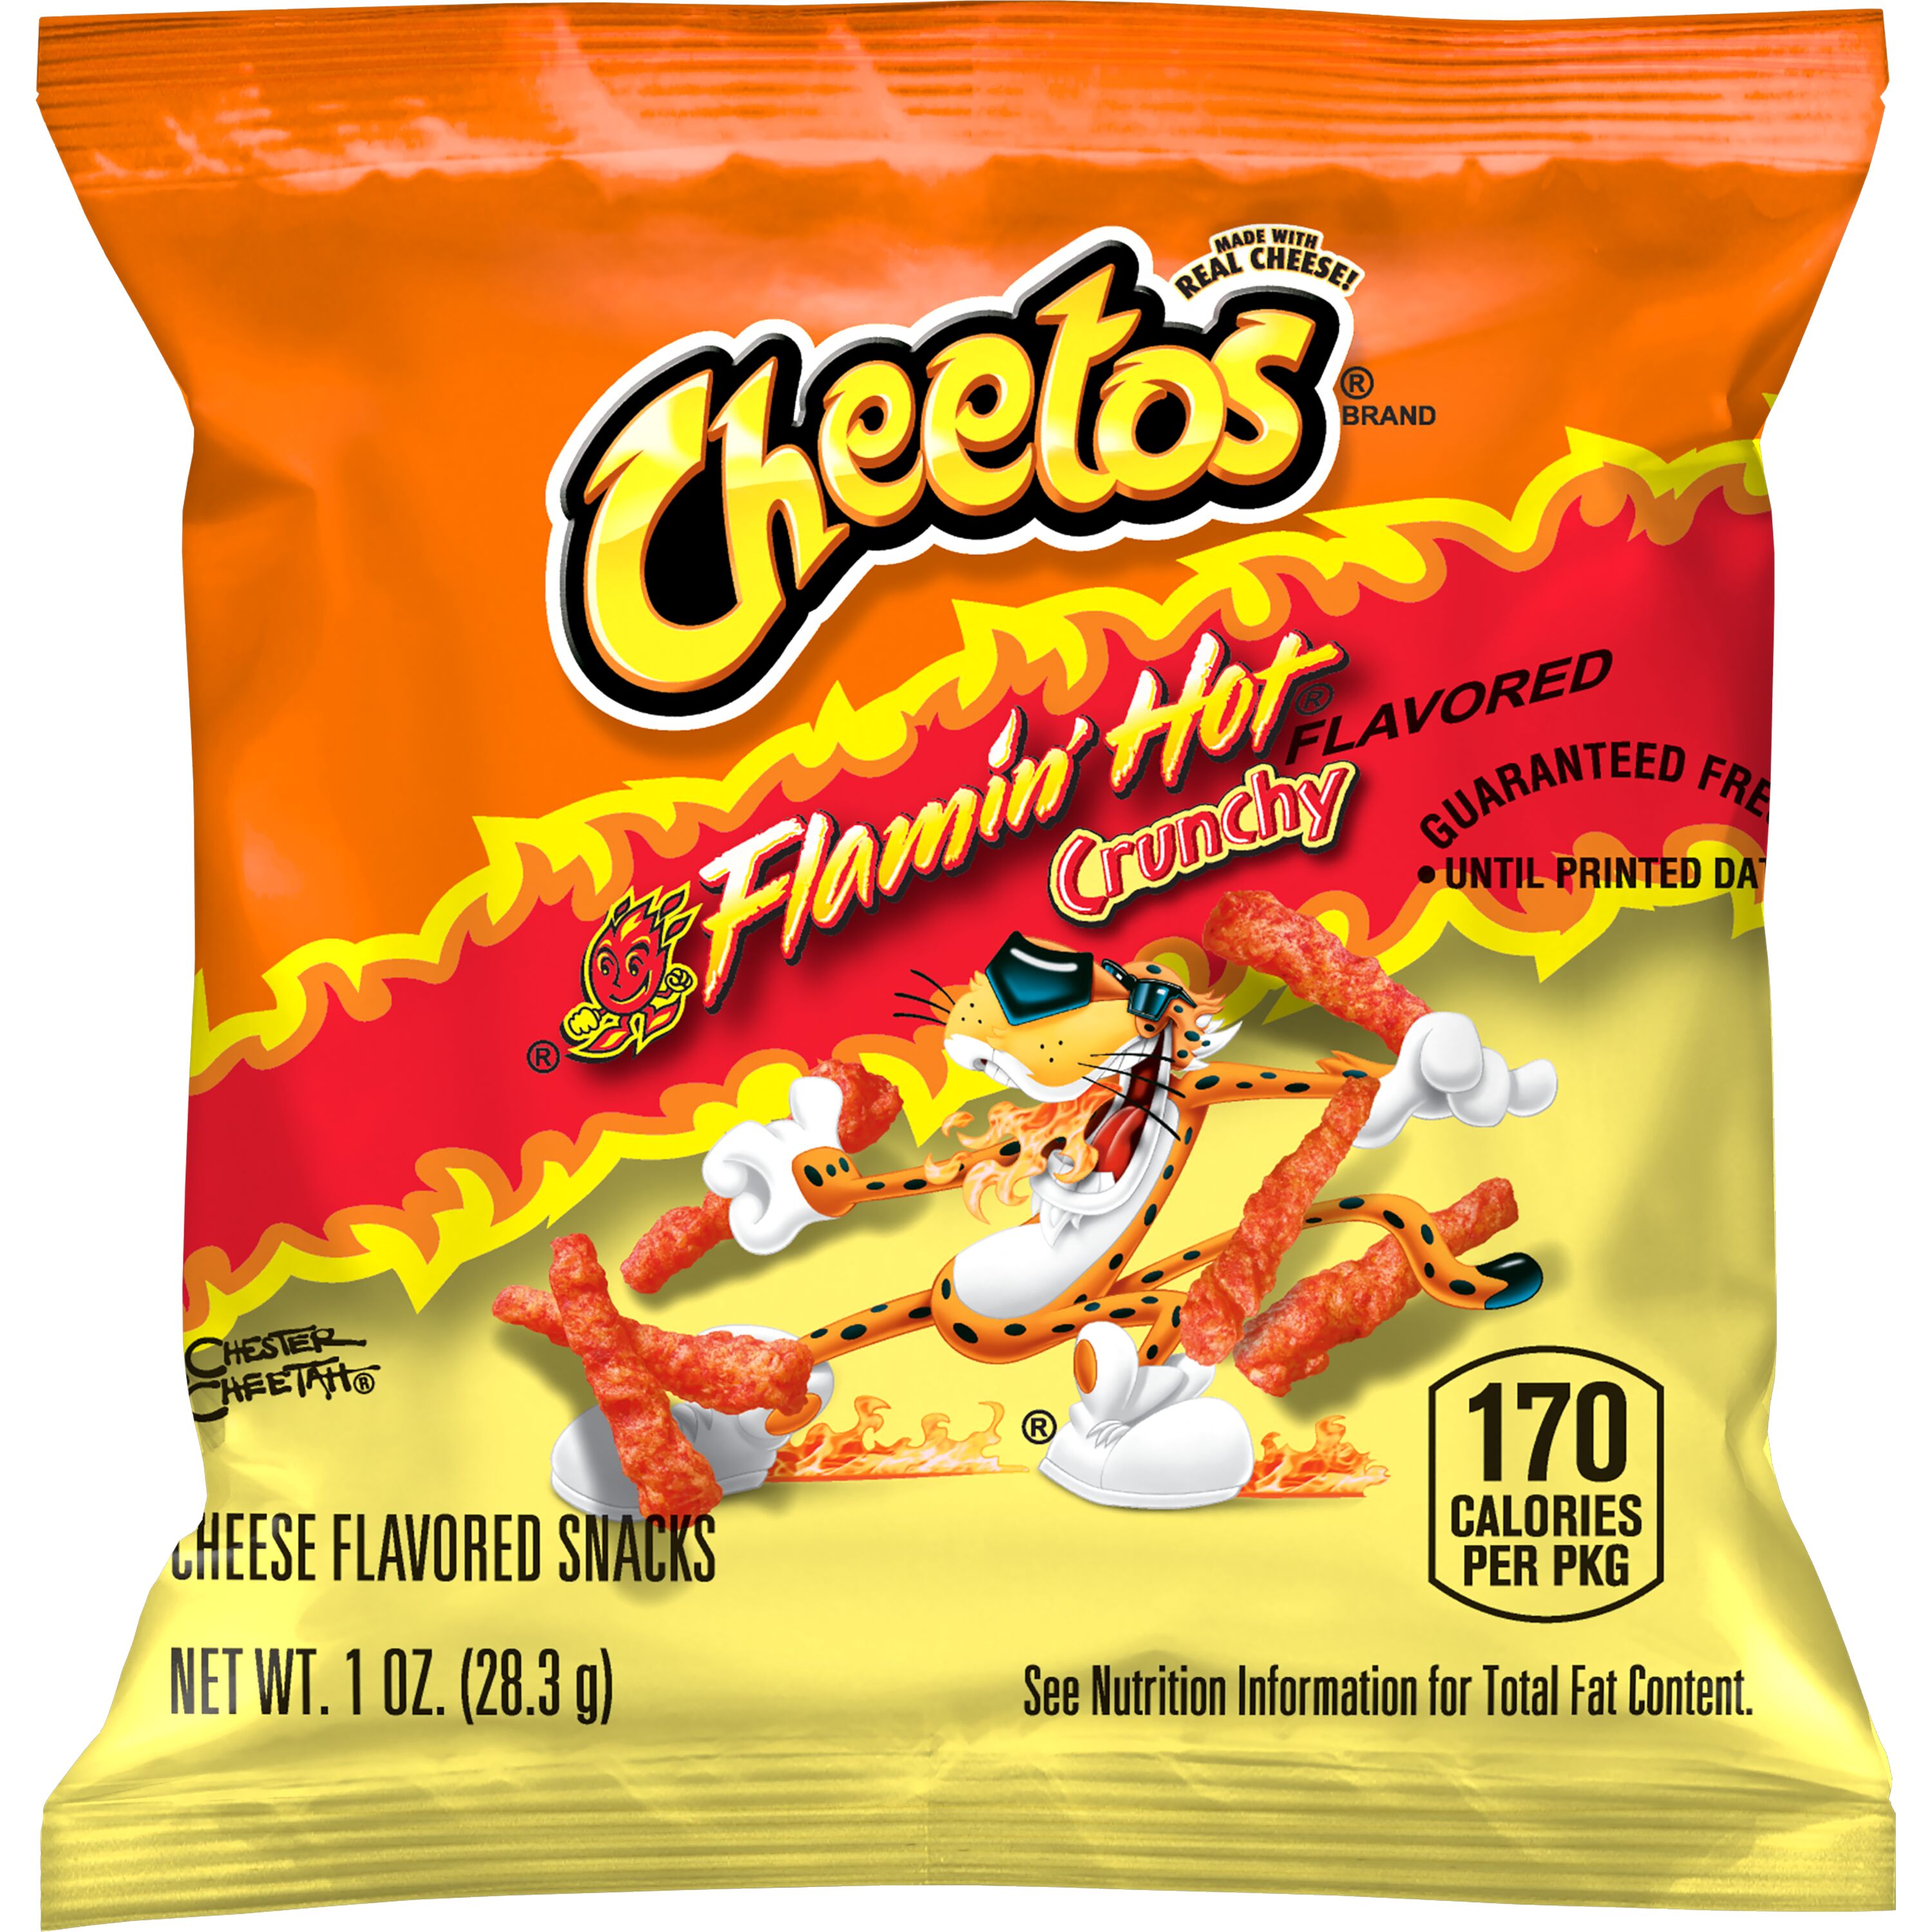 Cheetos, Crunchy, Flamin' Hot Flavored, Cheese Flavored Snacks ...